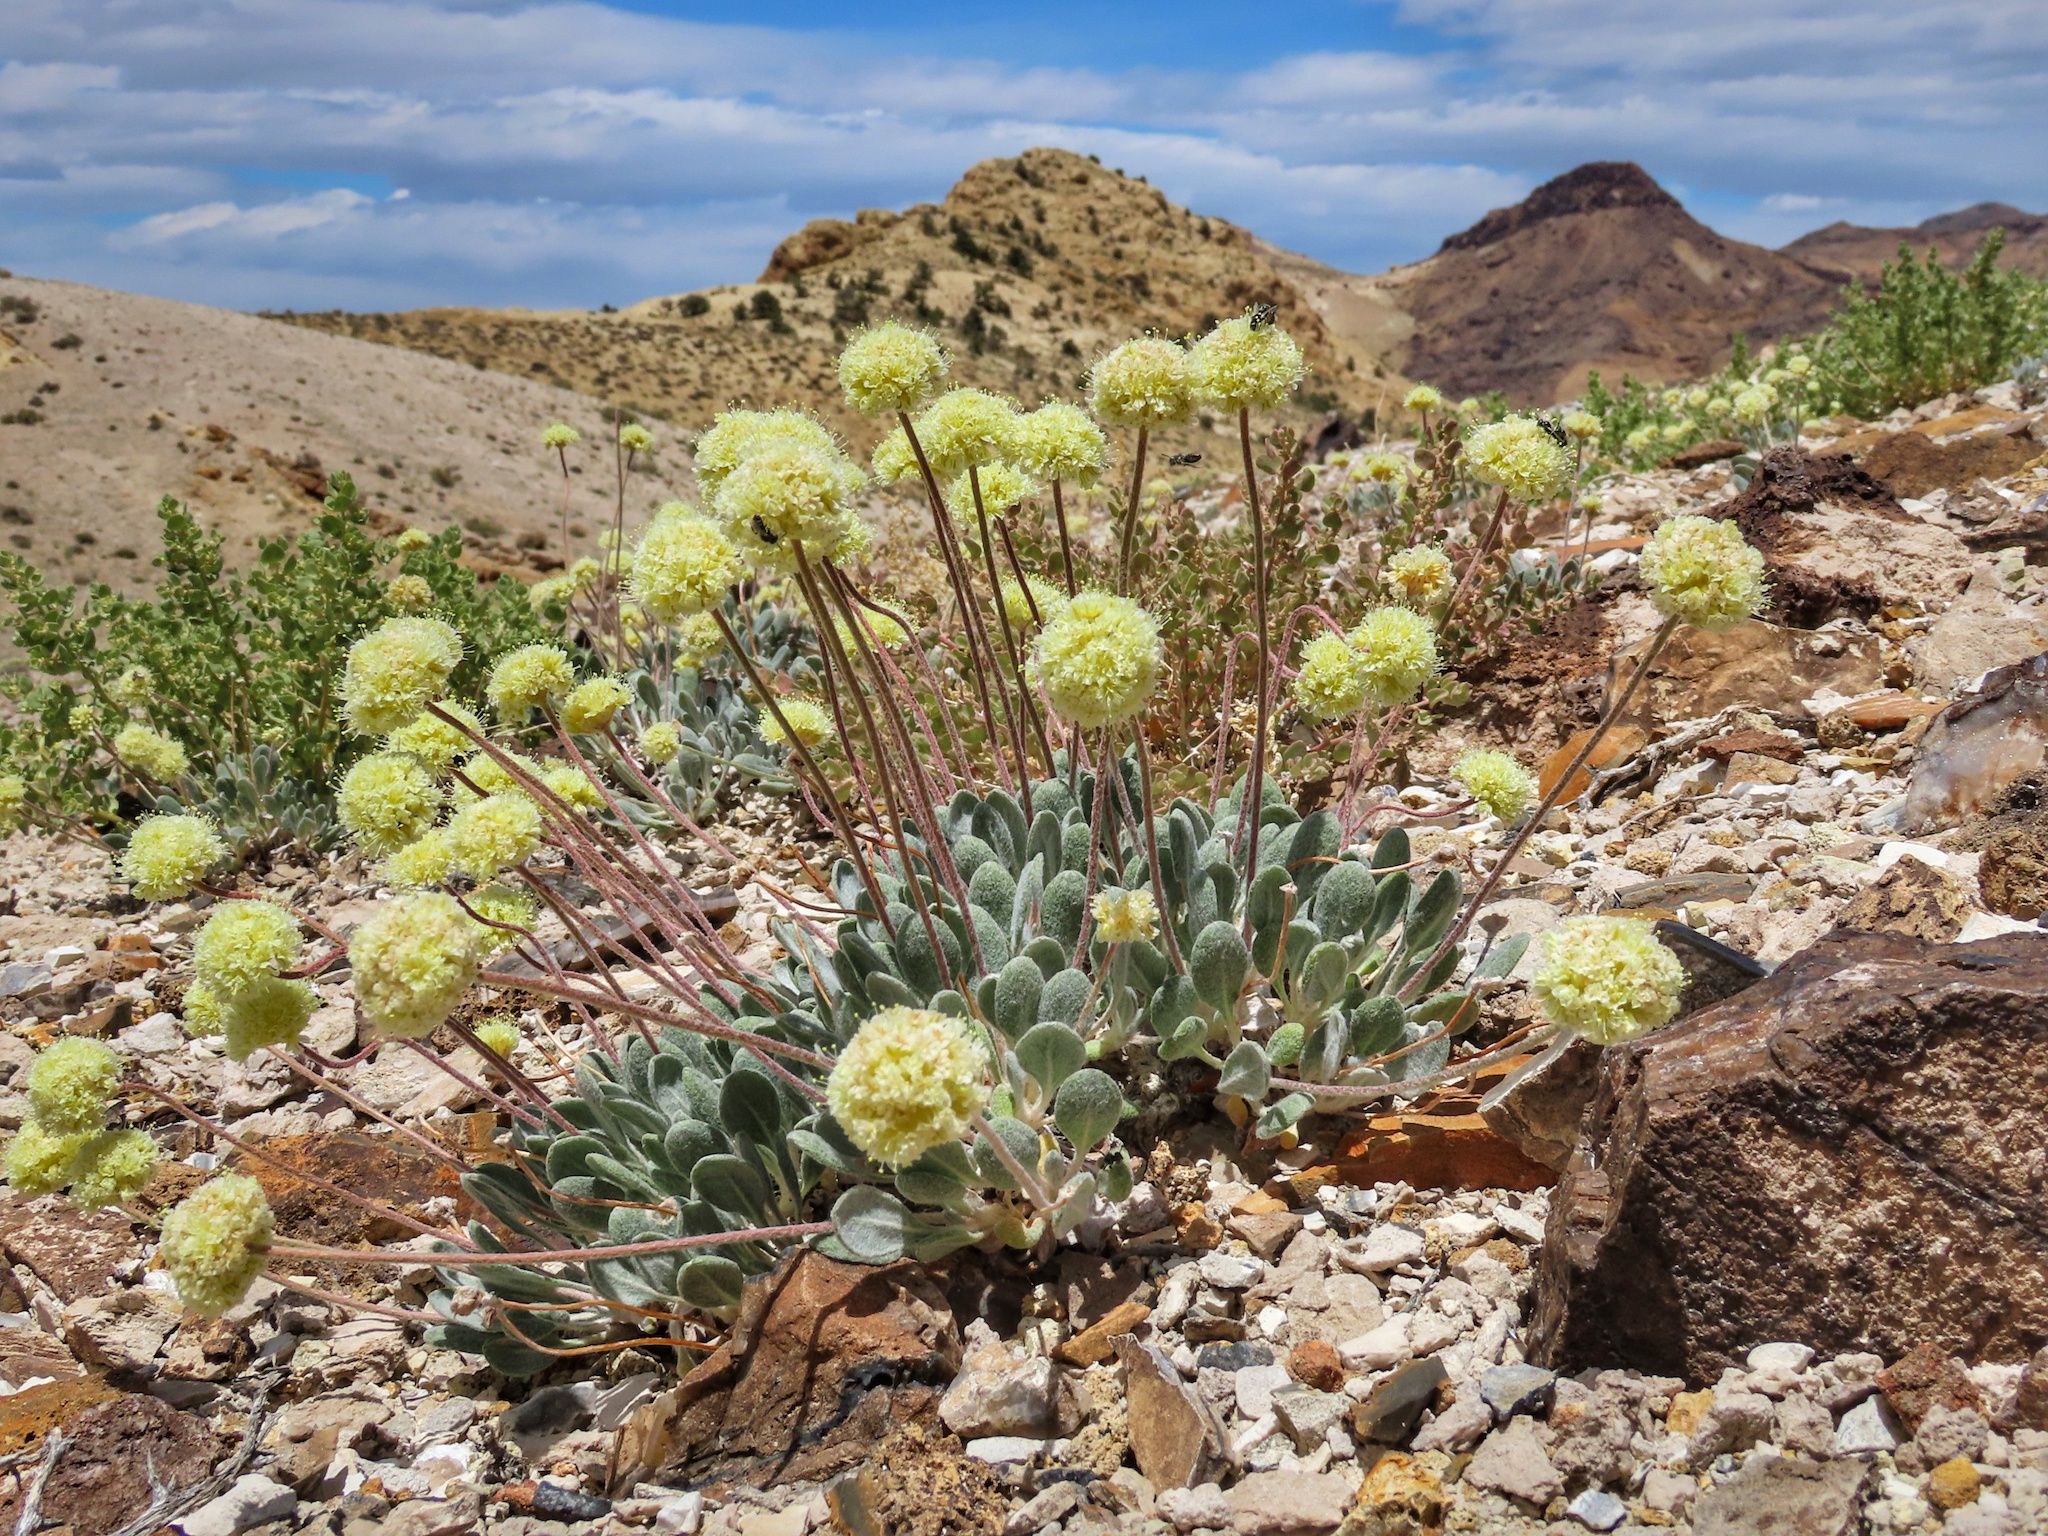 Tiehm’s buckwheat (Eriogonum tiehmii) is a rare species of wildflower in the buckwheat family. Over millennia the plant adapted to soils rich in lithium and boron in the Silver Peak Range of Esmeralda County, Nevada. (Patrick Donnelly / Center for Biological Diversity)